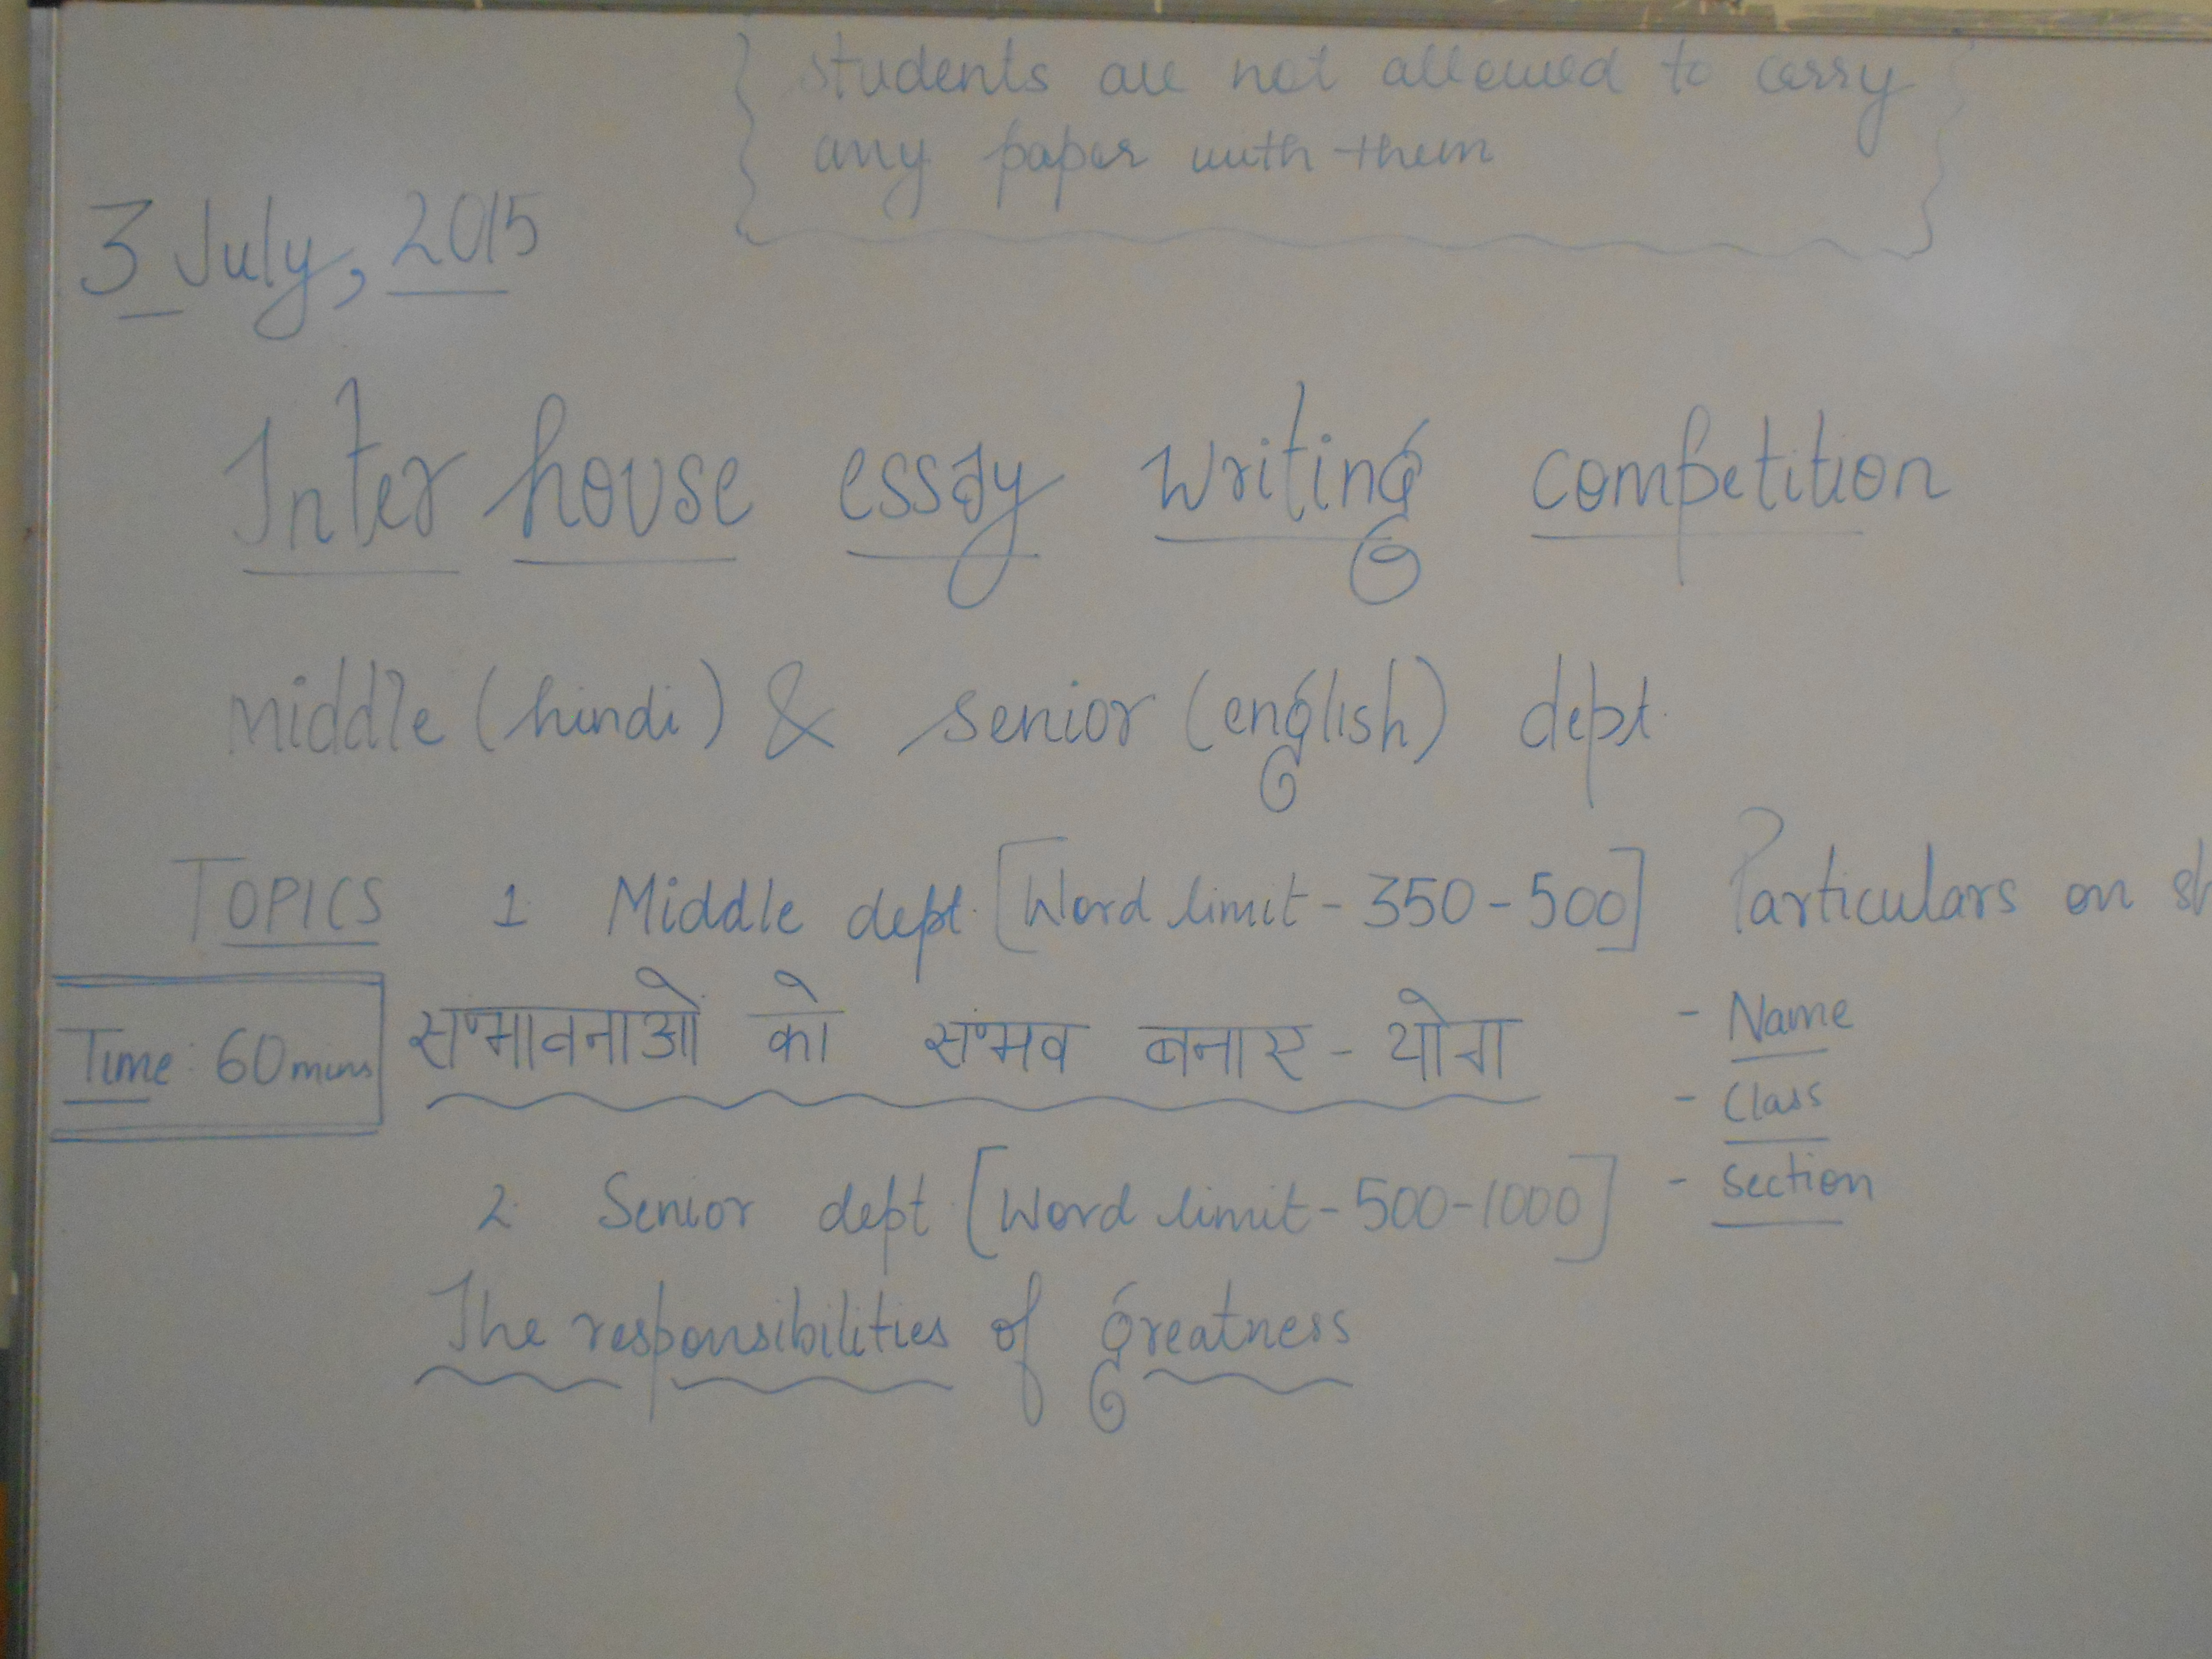 Topics for hindi essay writing competition